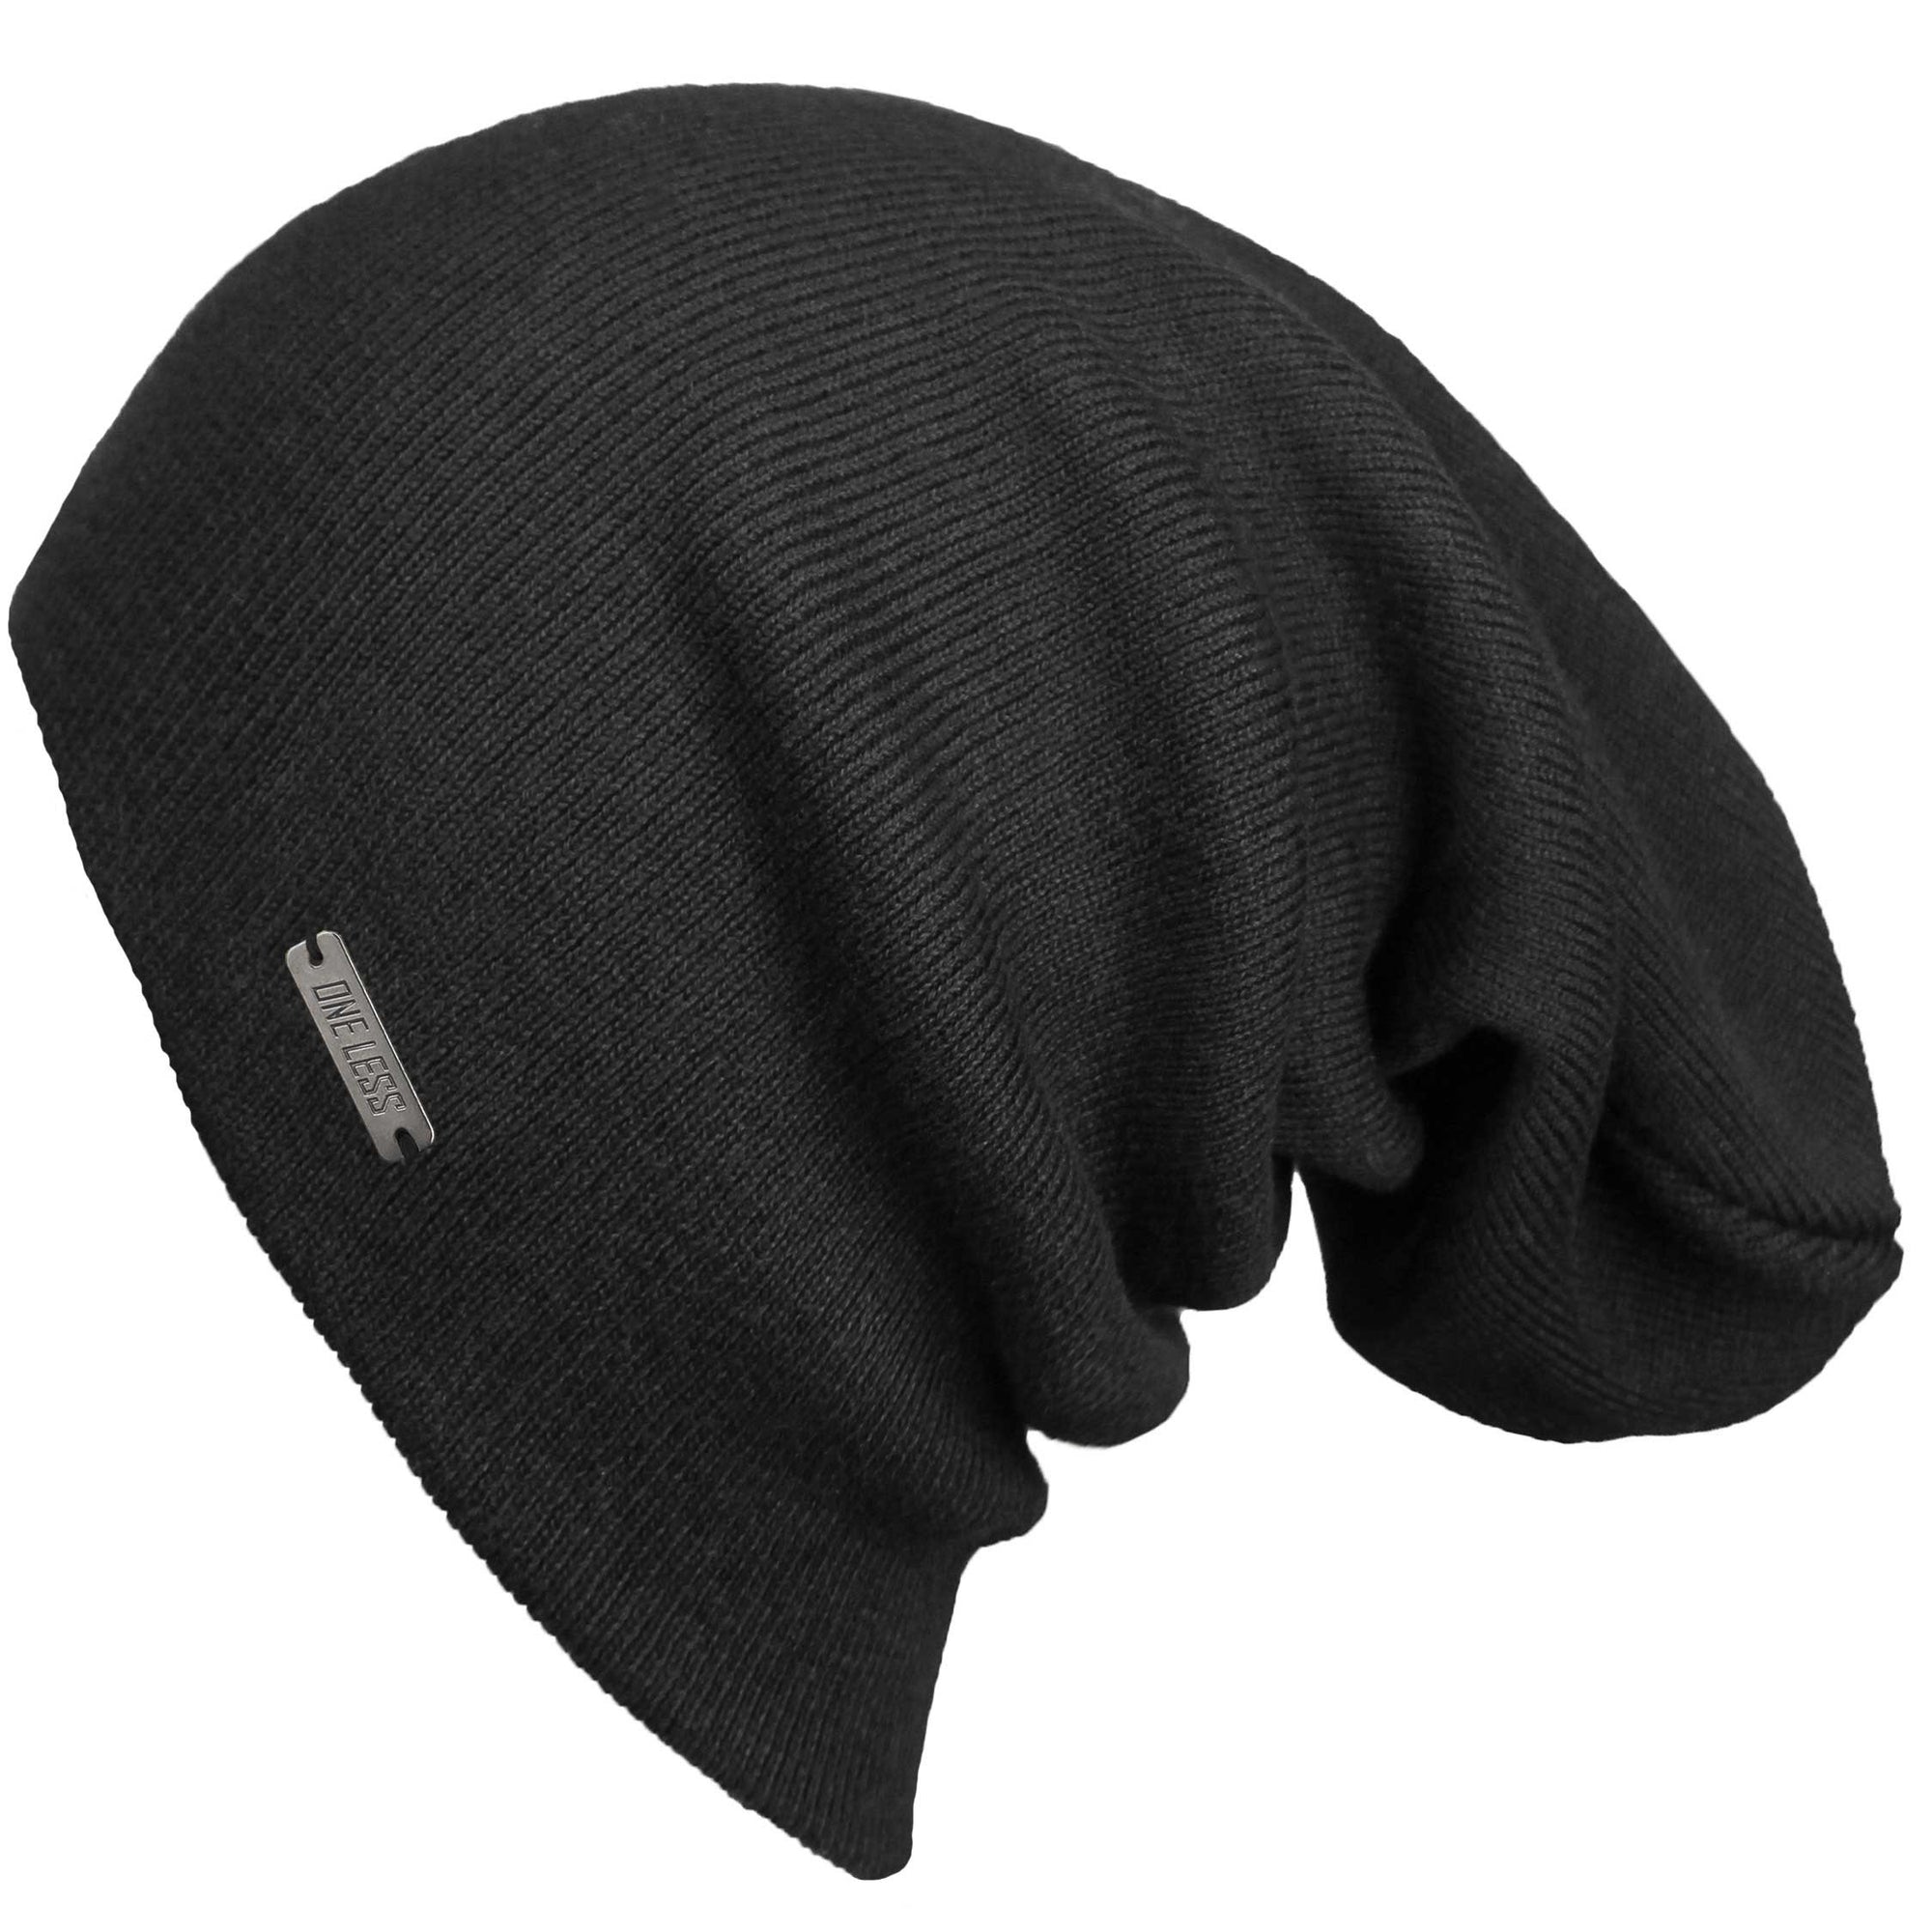 Fleece Flex Fifth - Performance King Supply Outlier - Beanie and XL The Mens